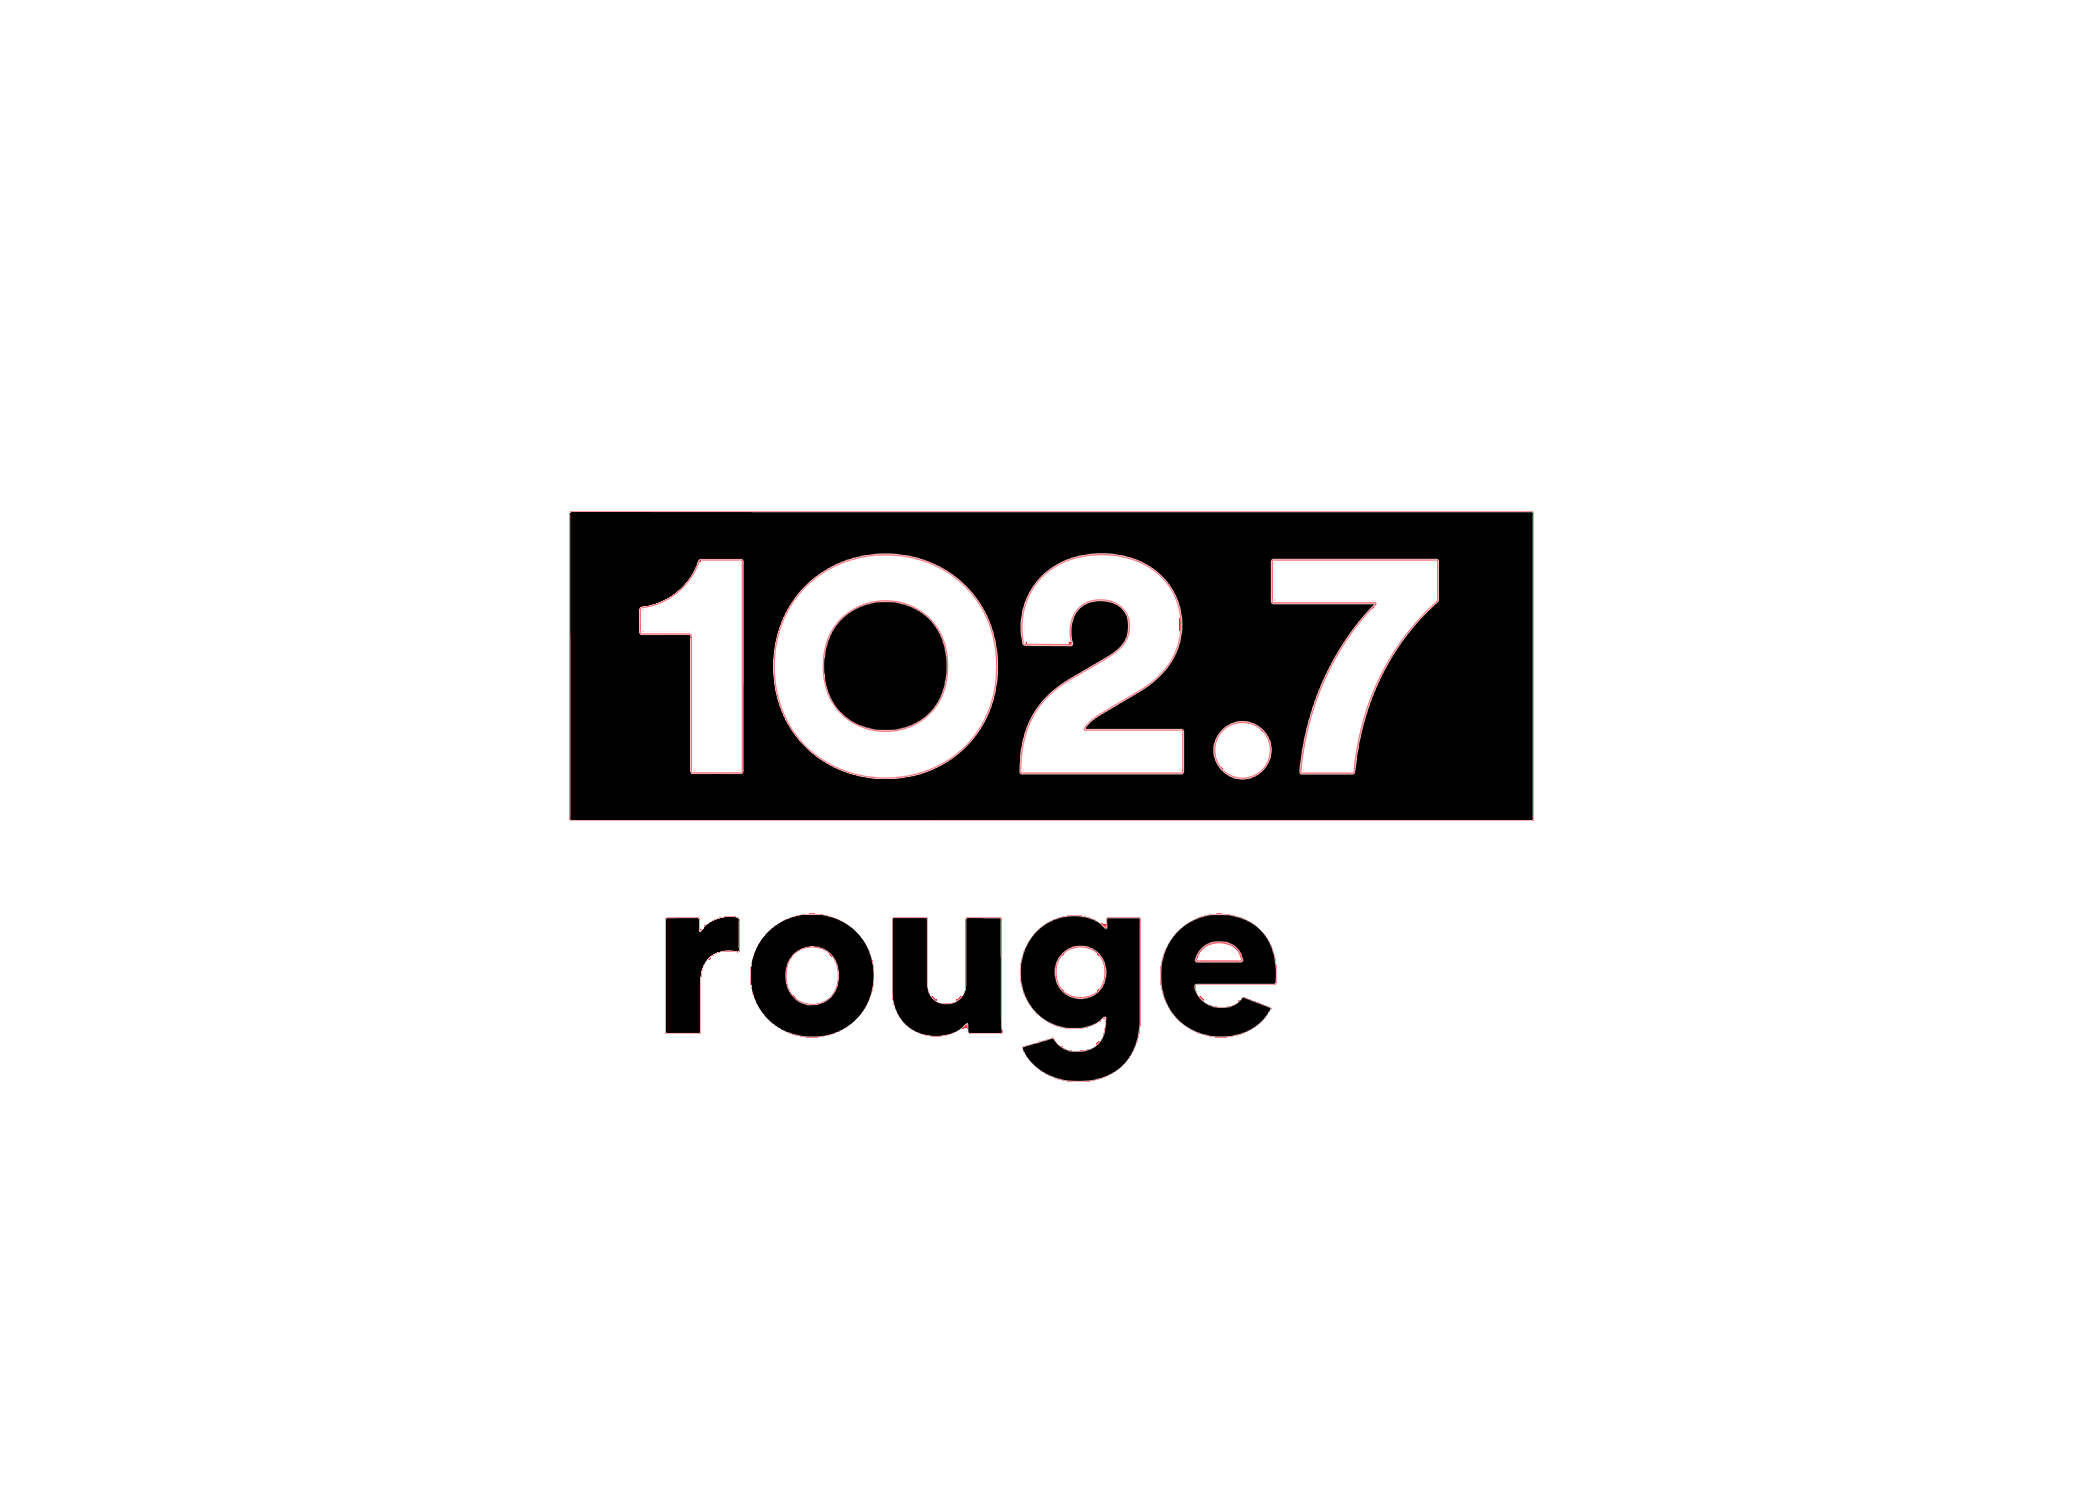 102.7 rouge